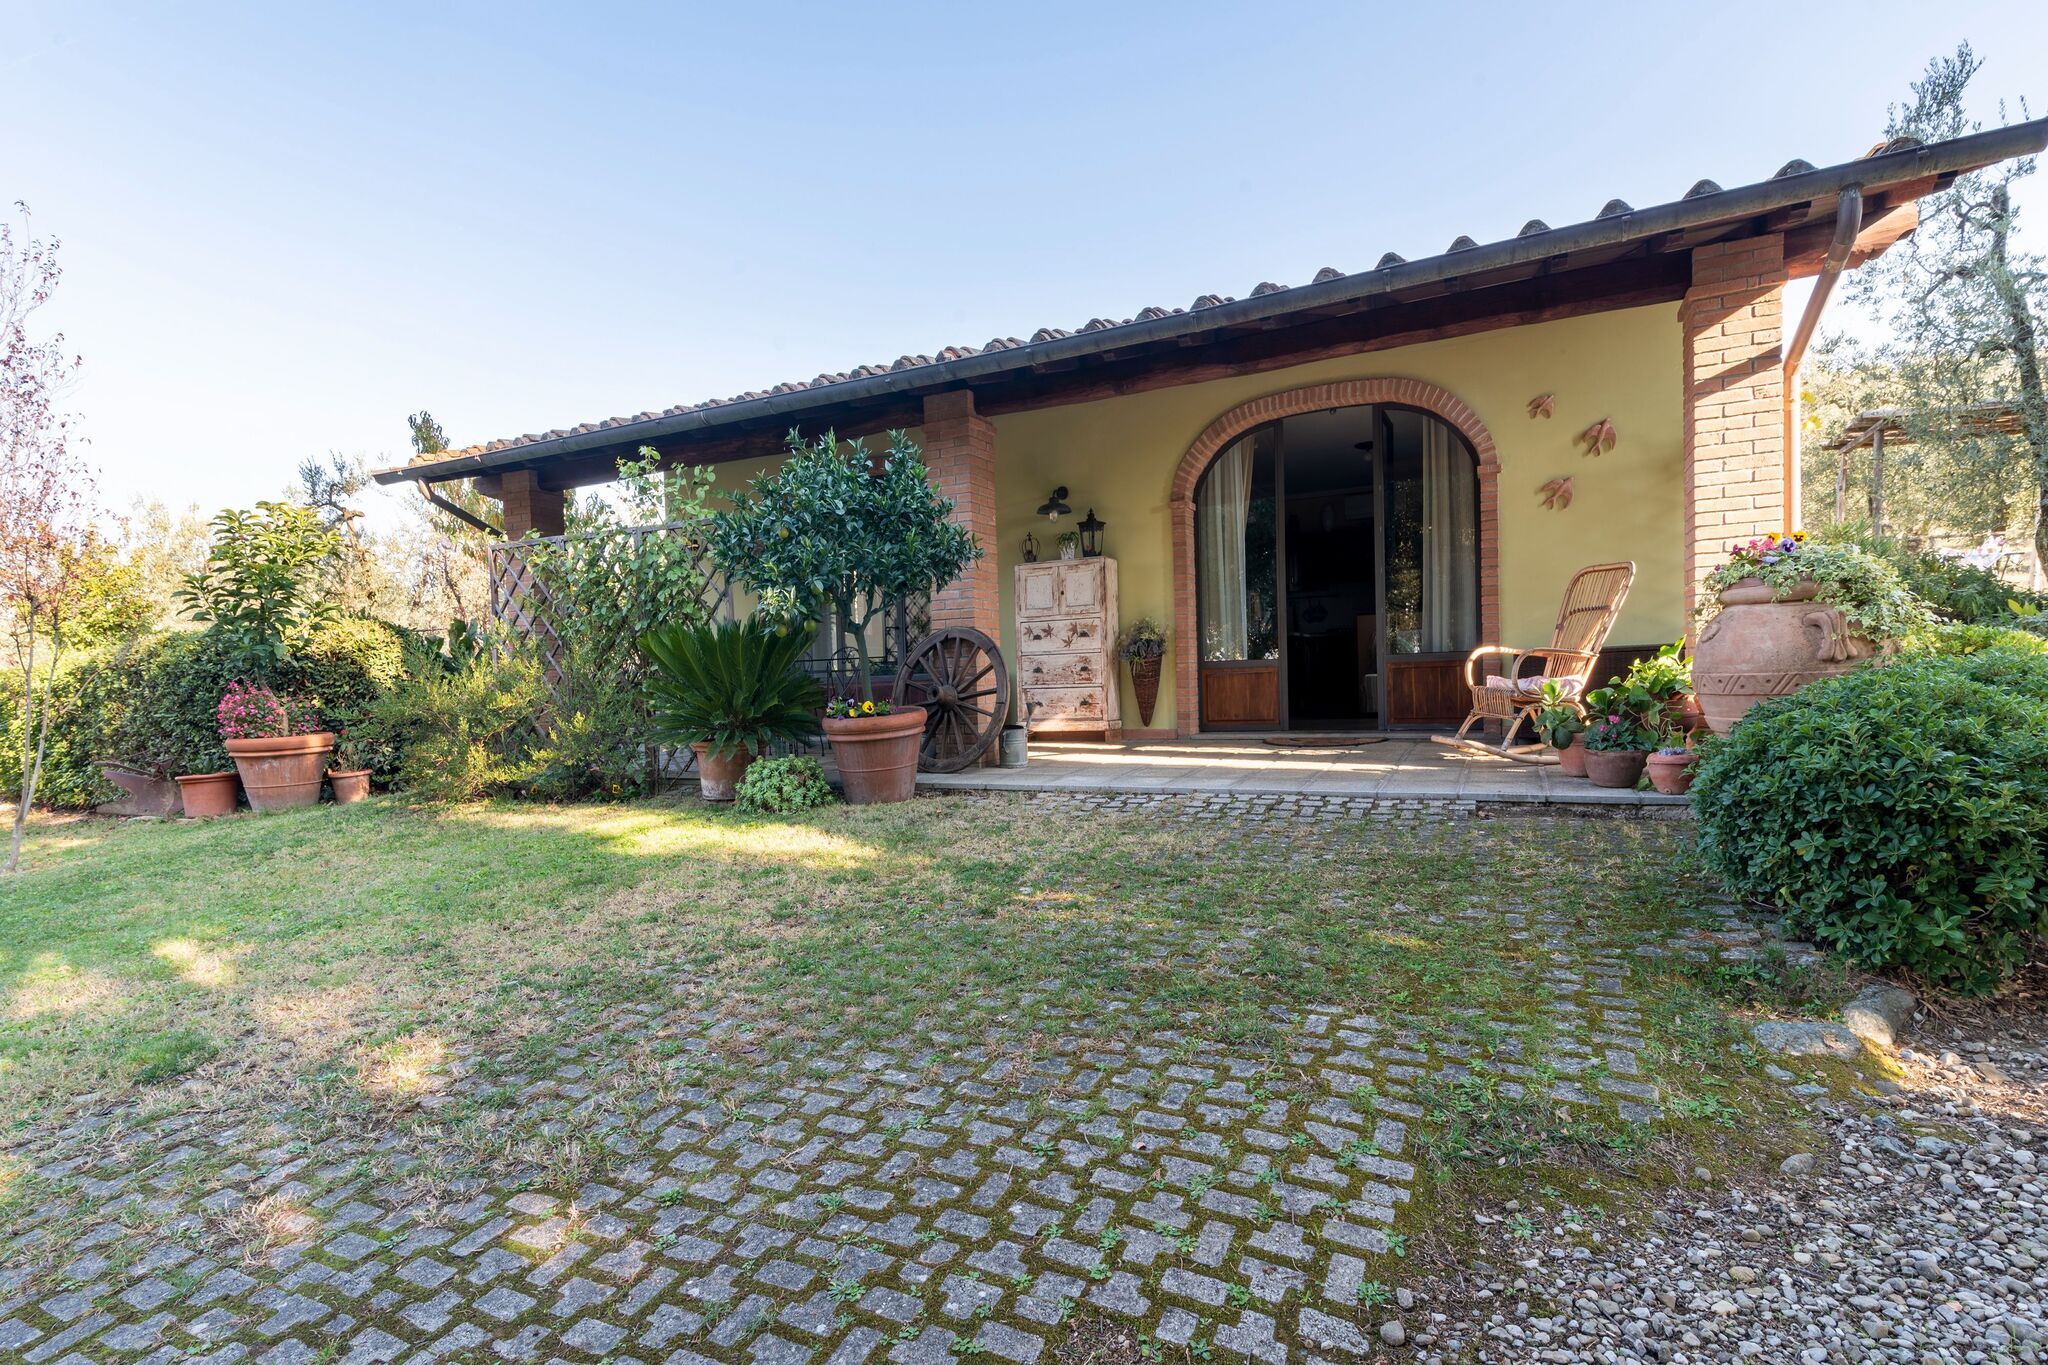 Detached house in the hills of Arezzo, surrounded by olive trees